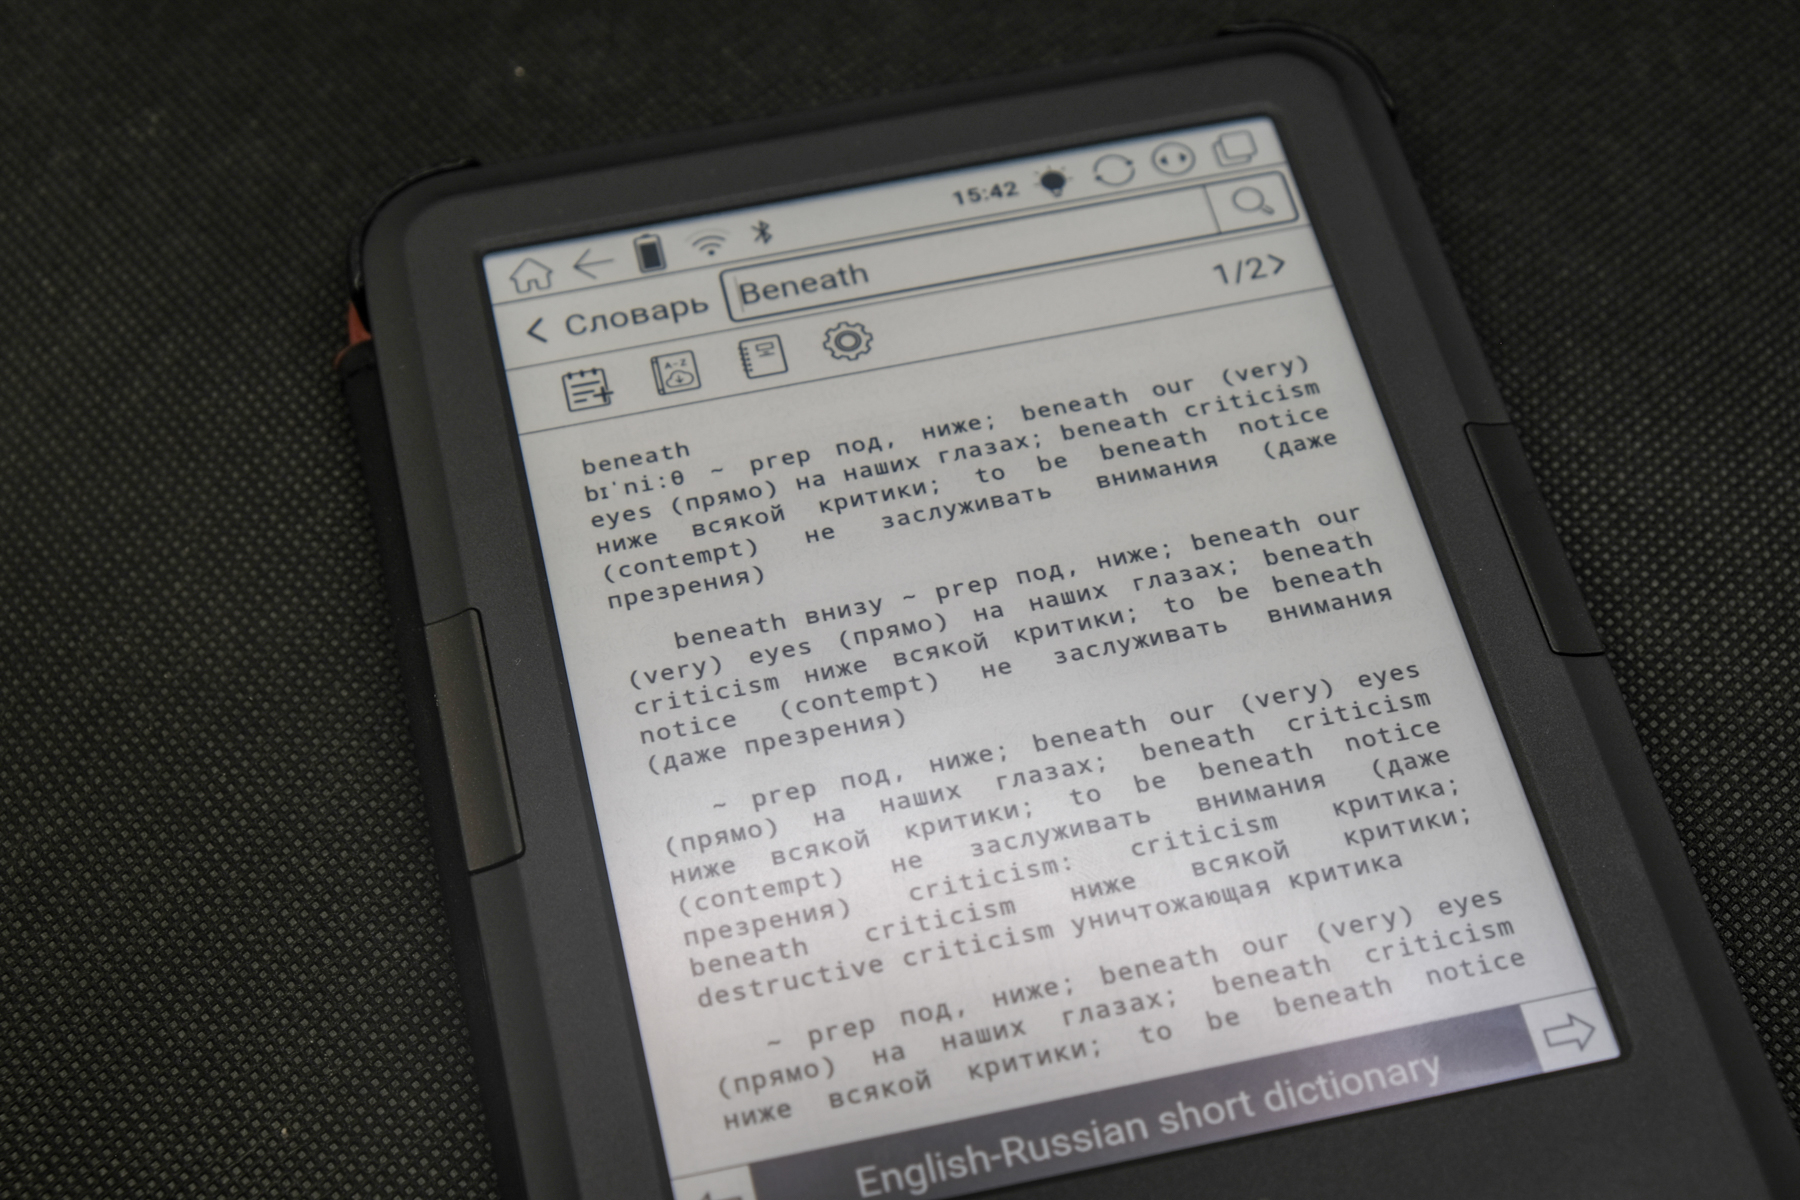 Onyx Boox Darwin 8 e-reader review: Practical and recognisable